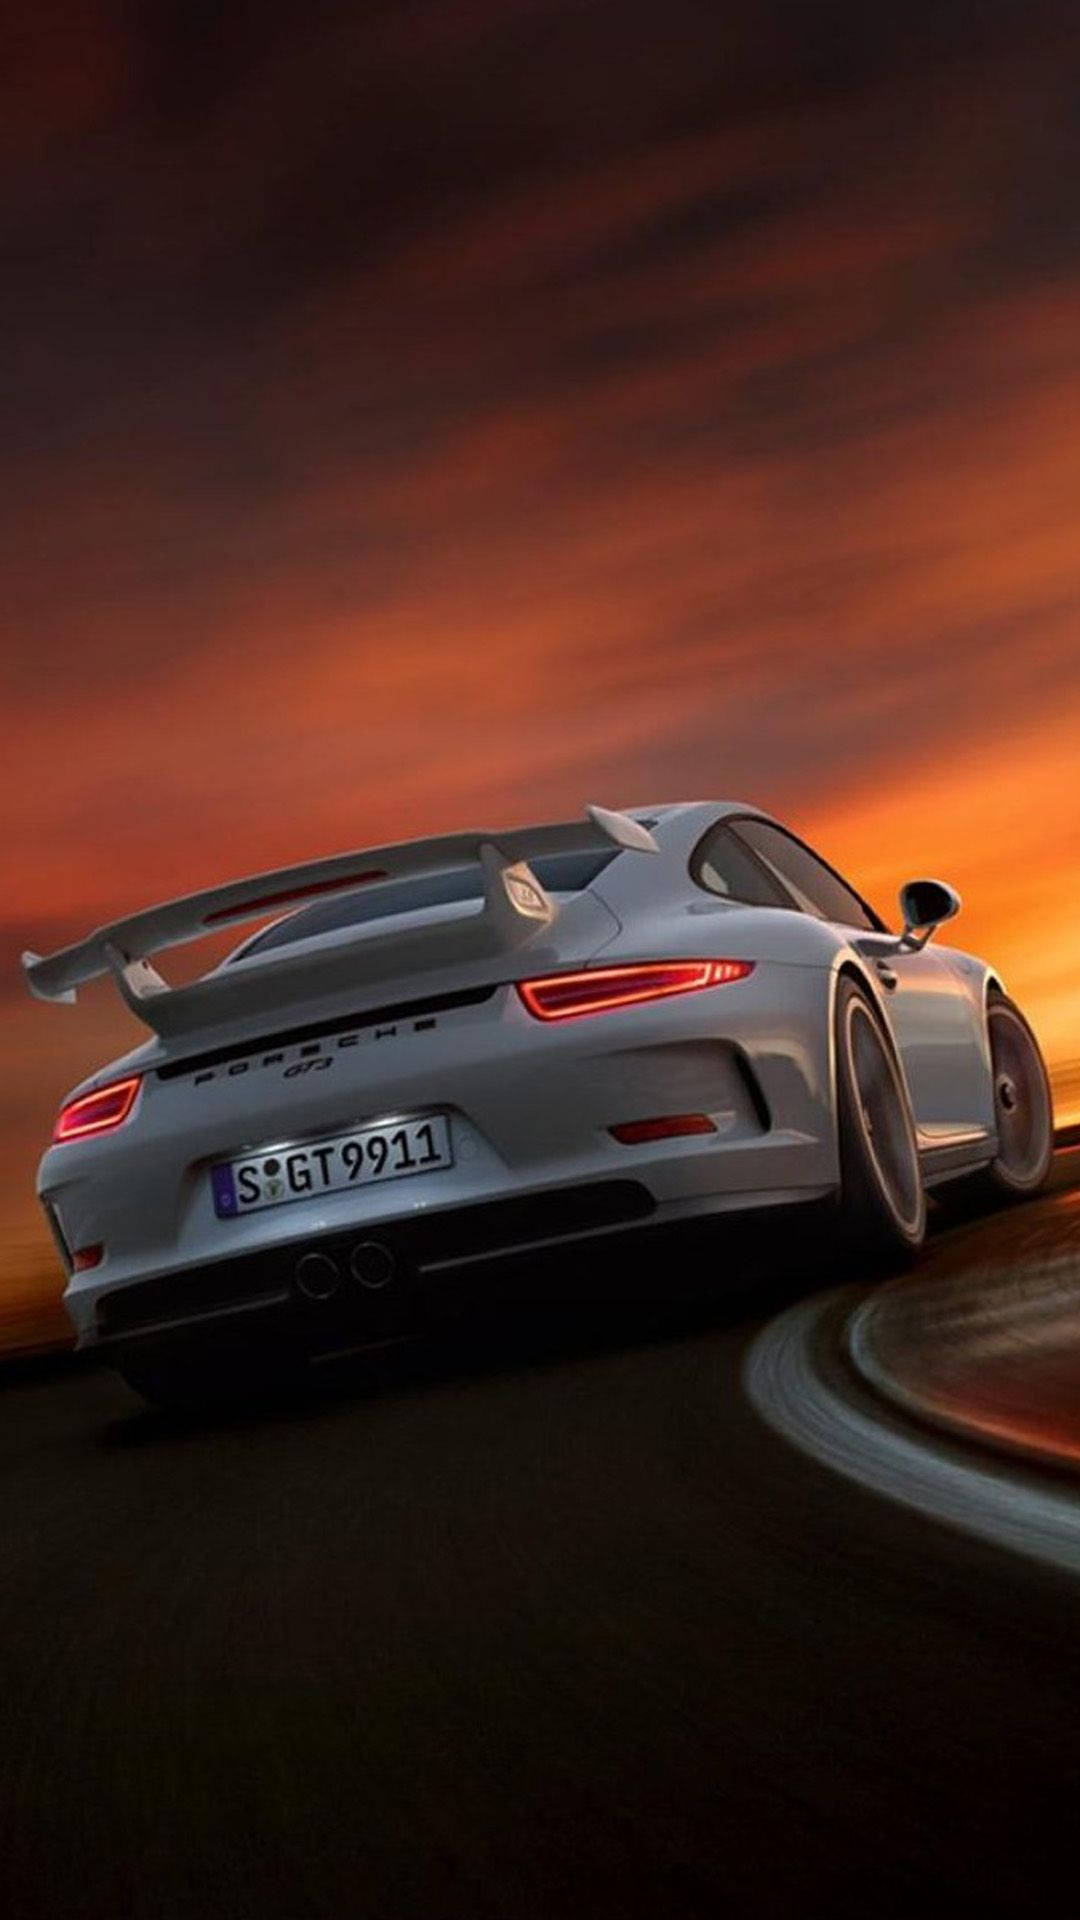 Sunset And White Porsche Gt3 Car Iphone Background